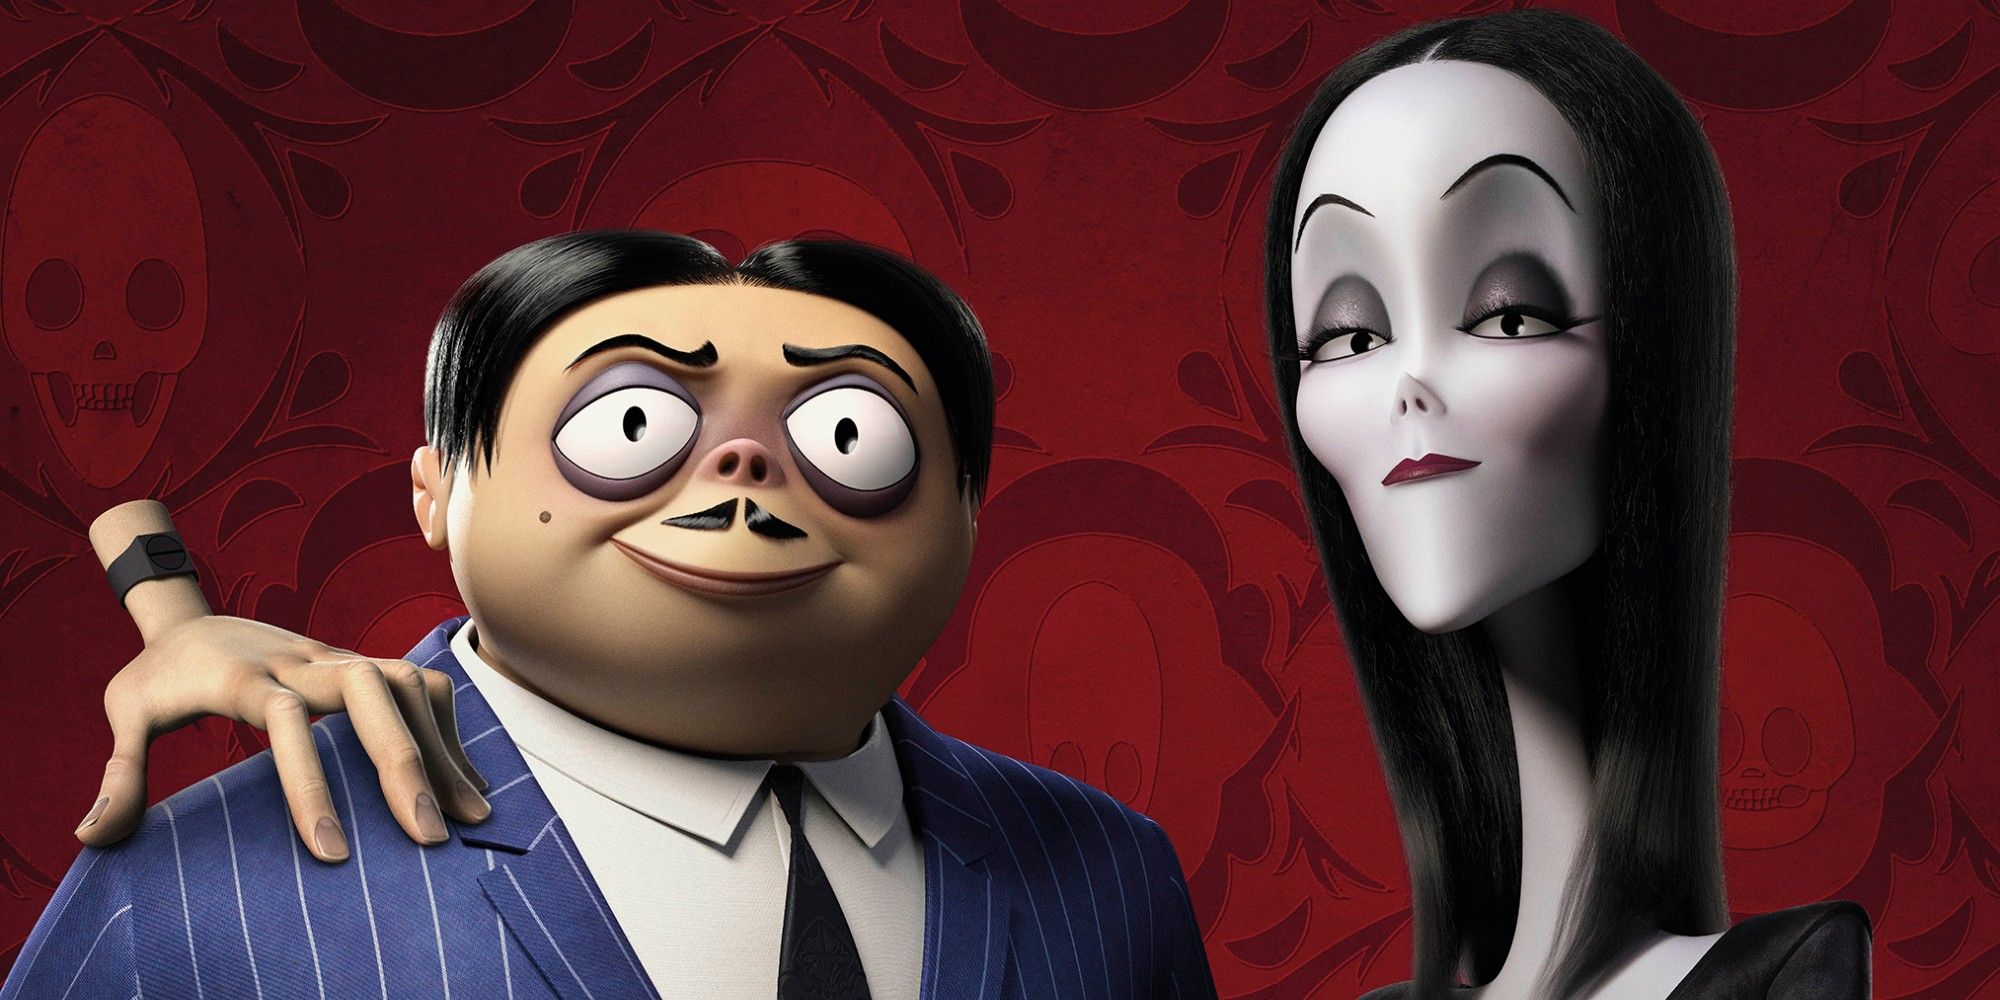 Addams Family 2 Is In The Works Gets October 2021 Release Date